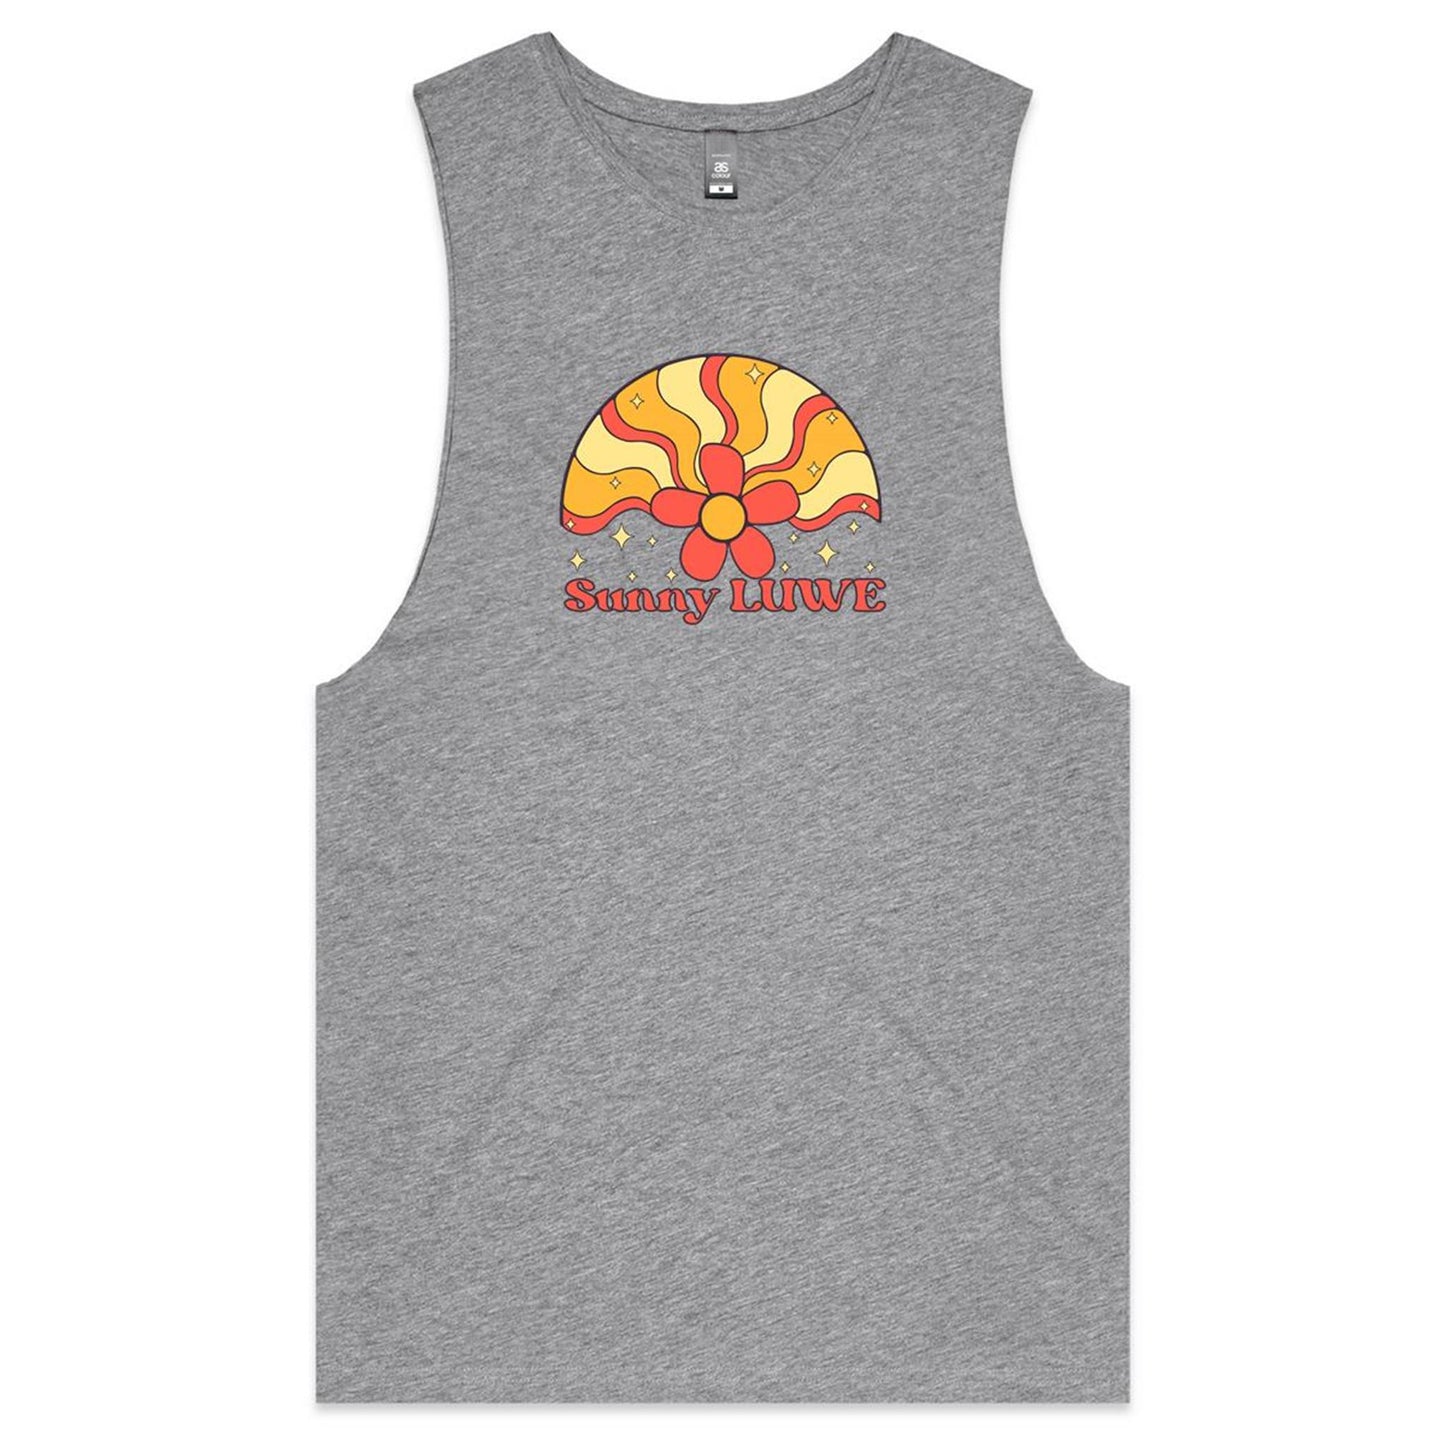 Suns out Guns Out Sunny Luwe Tank Top Tee